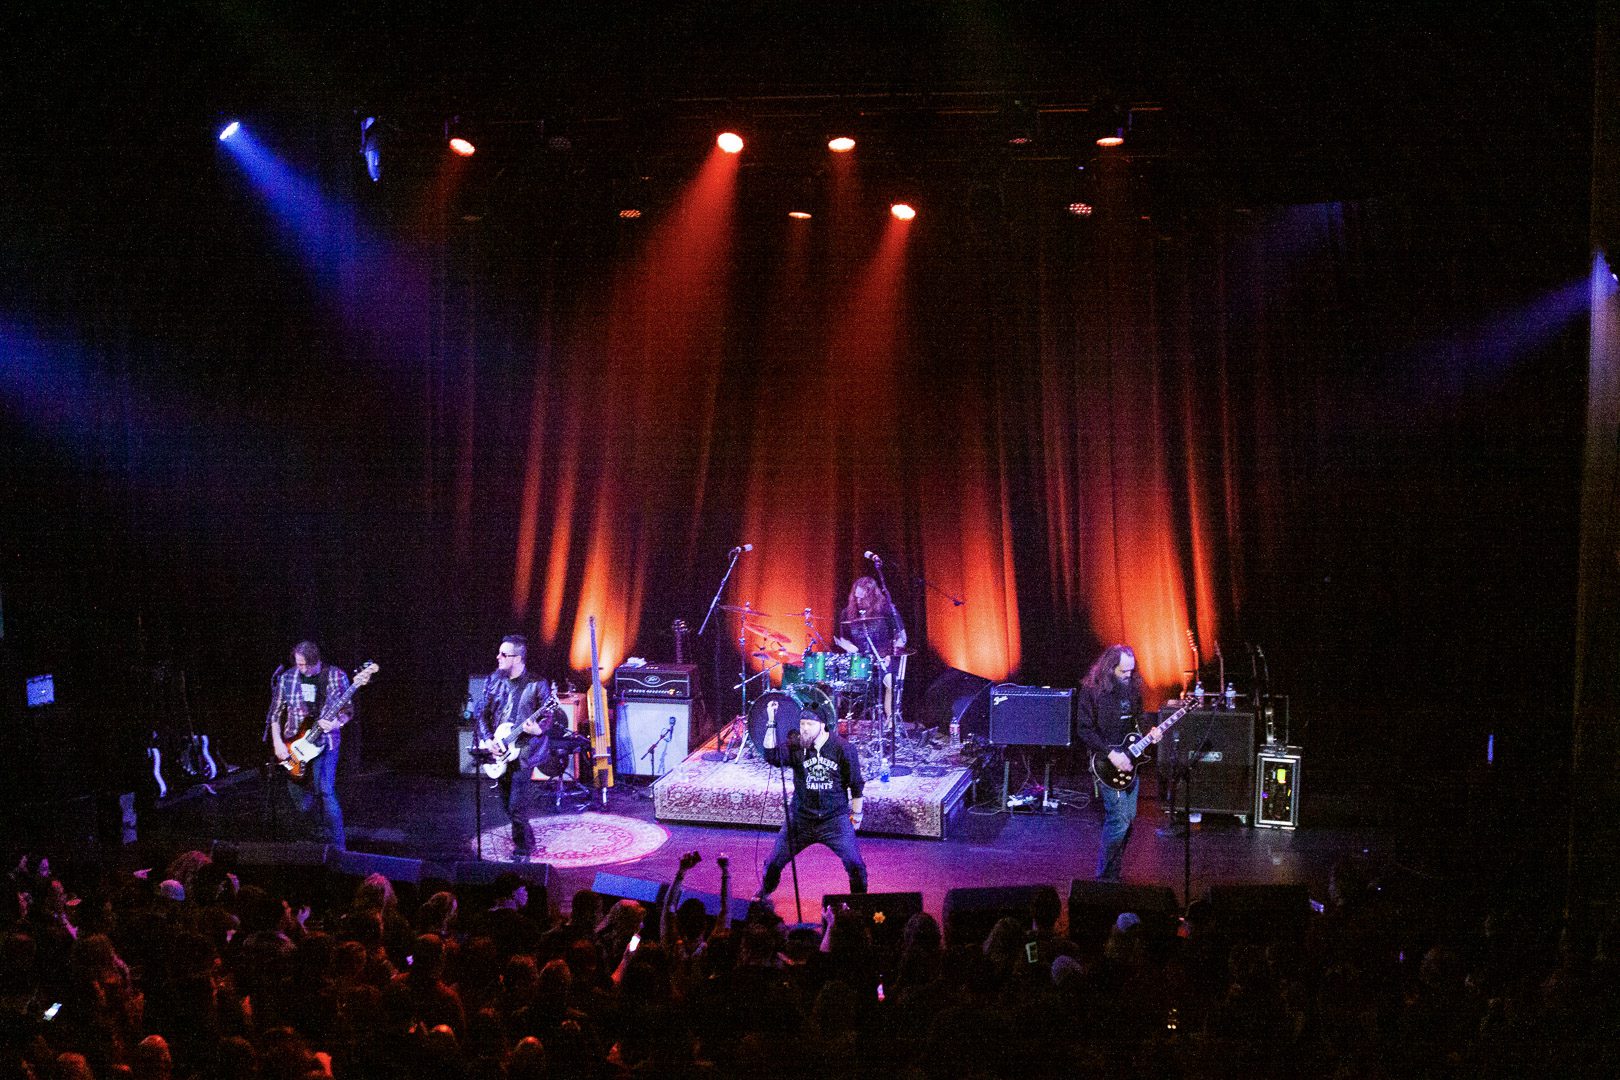 A band performing on stage with lights in the background.